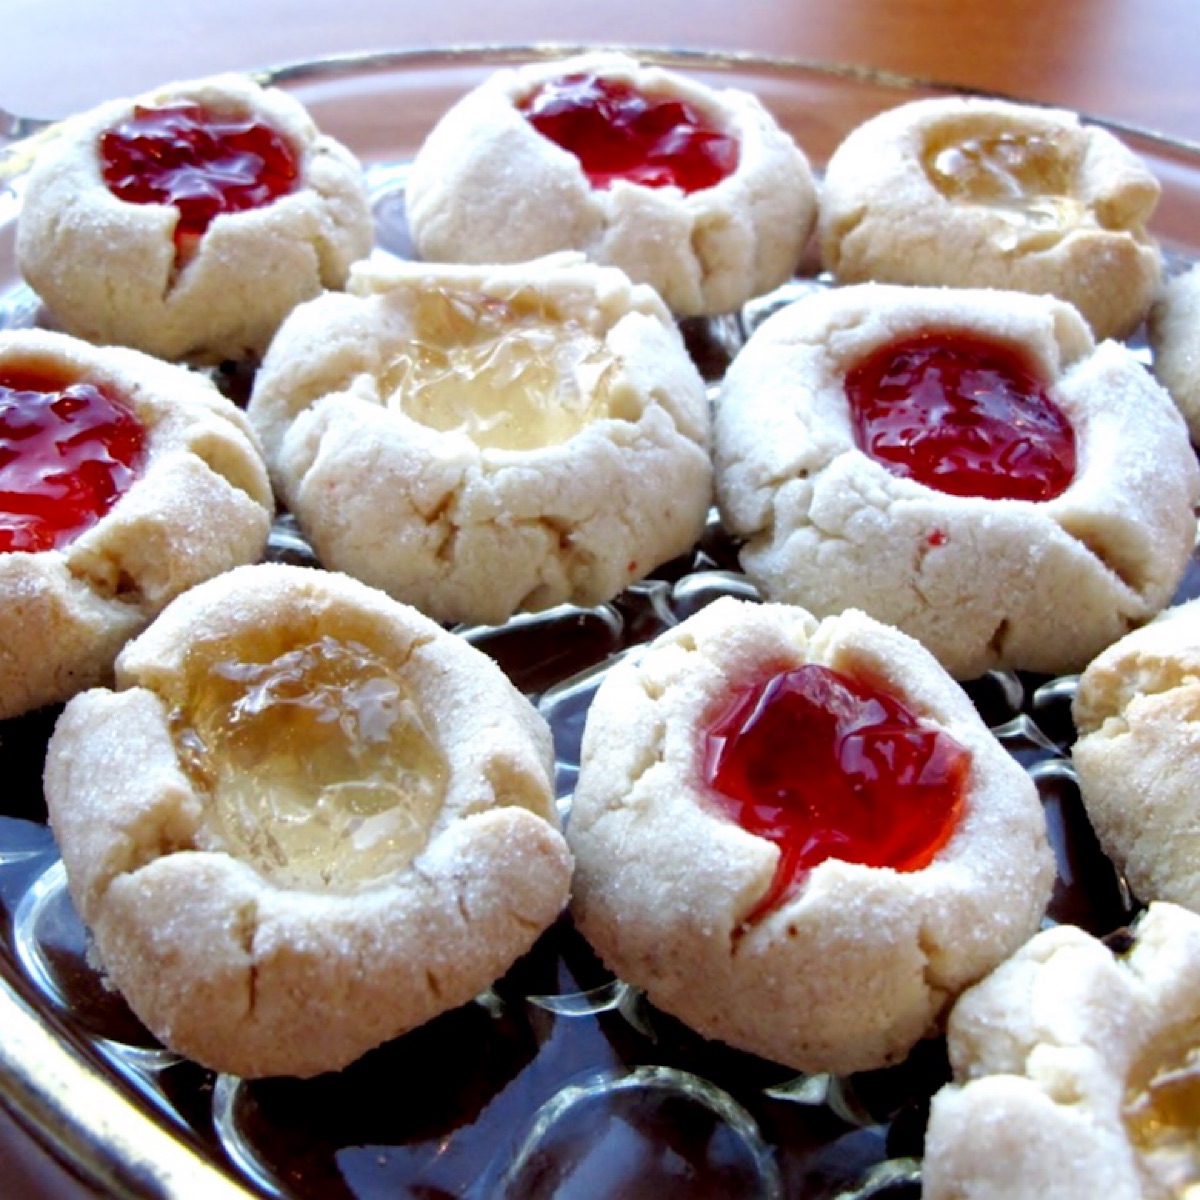 Ginger-flavored thumbpring cookies with champagne jelly fillings.